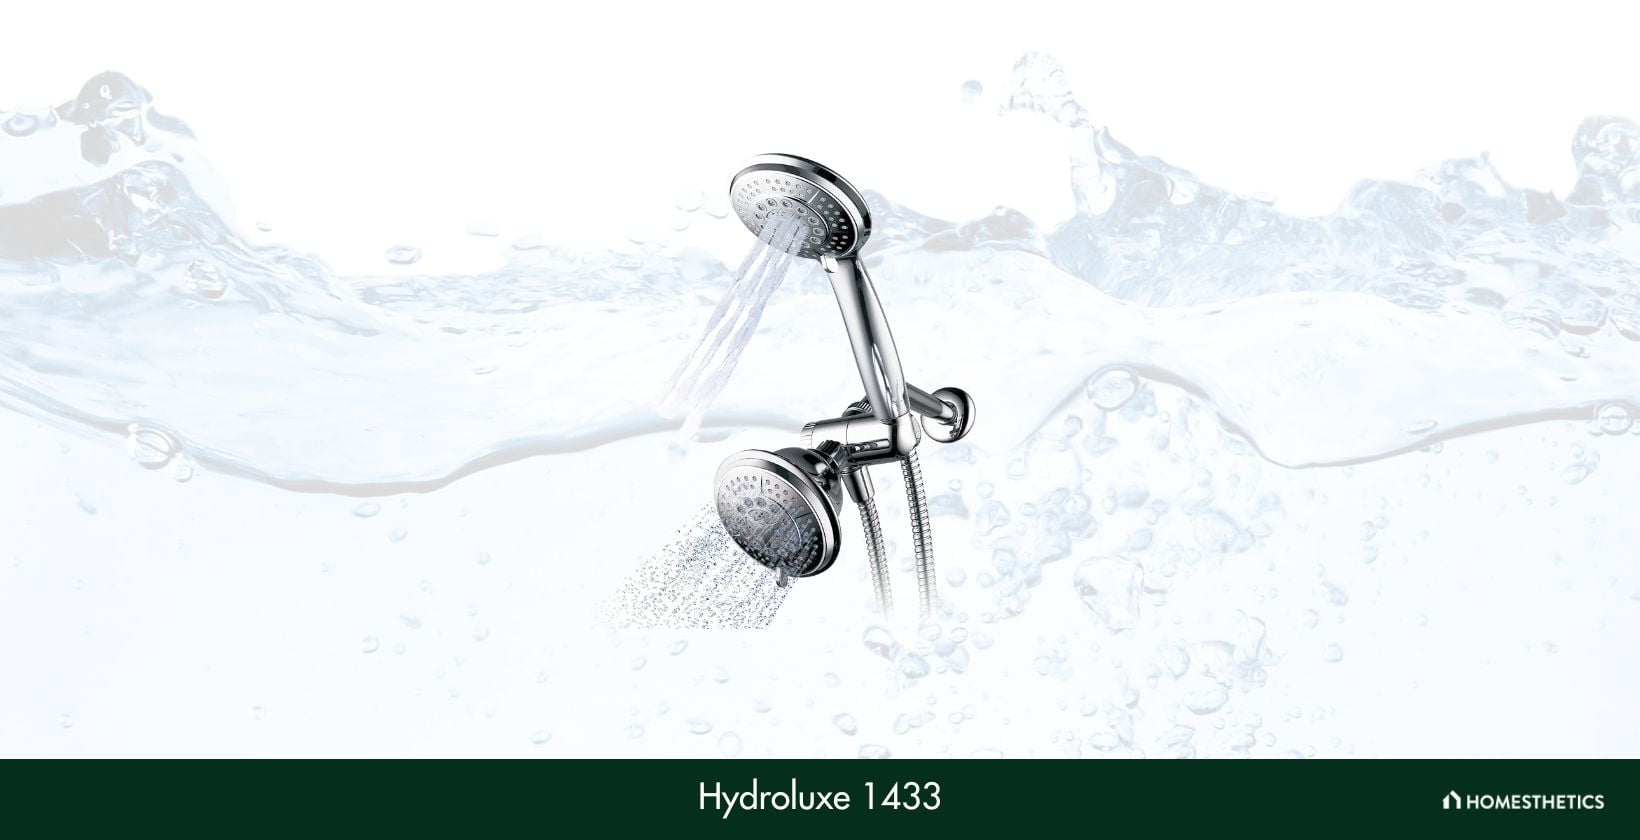 Hydroluxe 1433